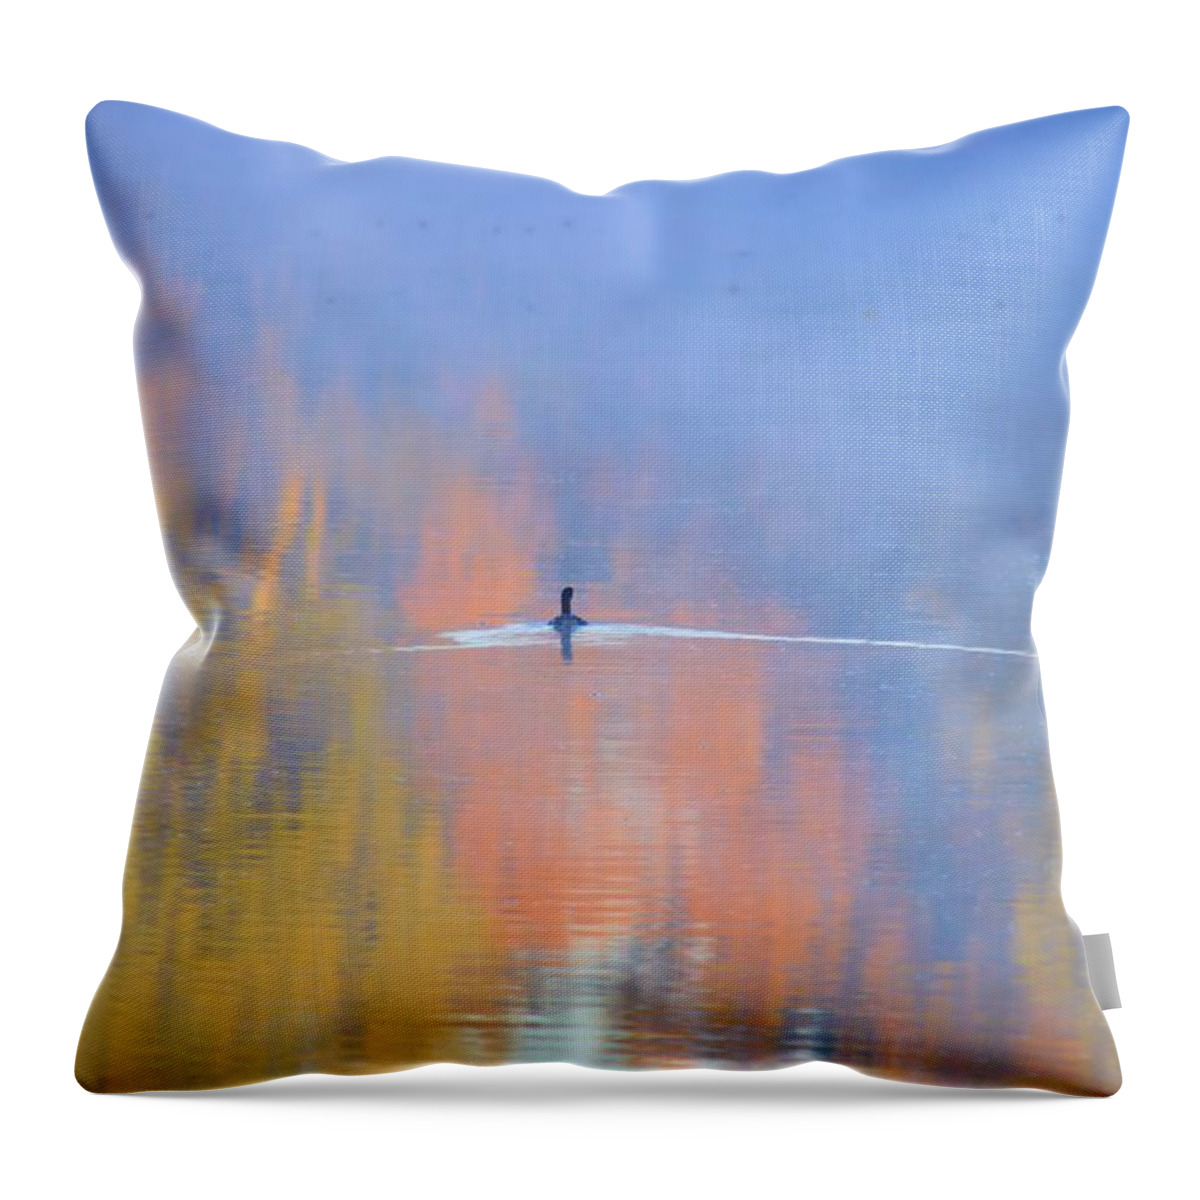 Pond Throw Pillow featuring the photograph Foggy Swim by Bonfire Photography